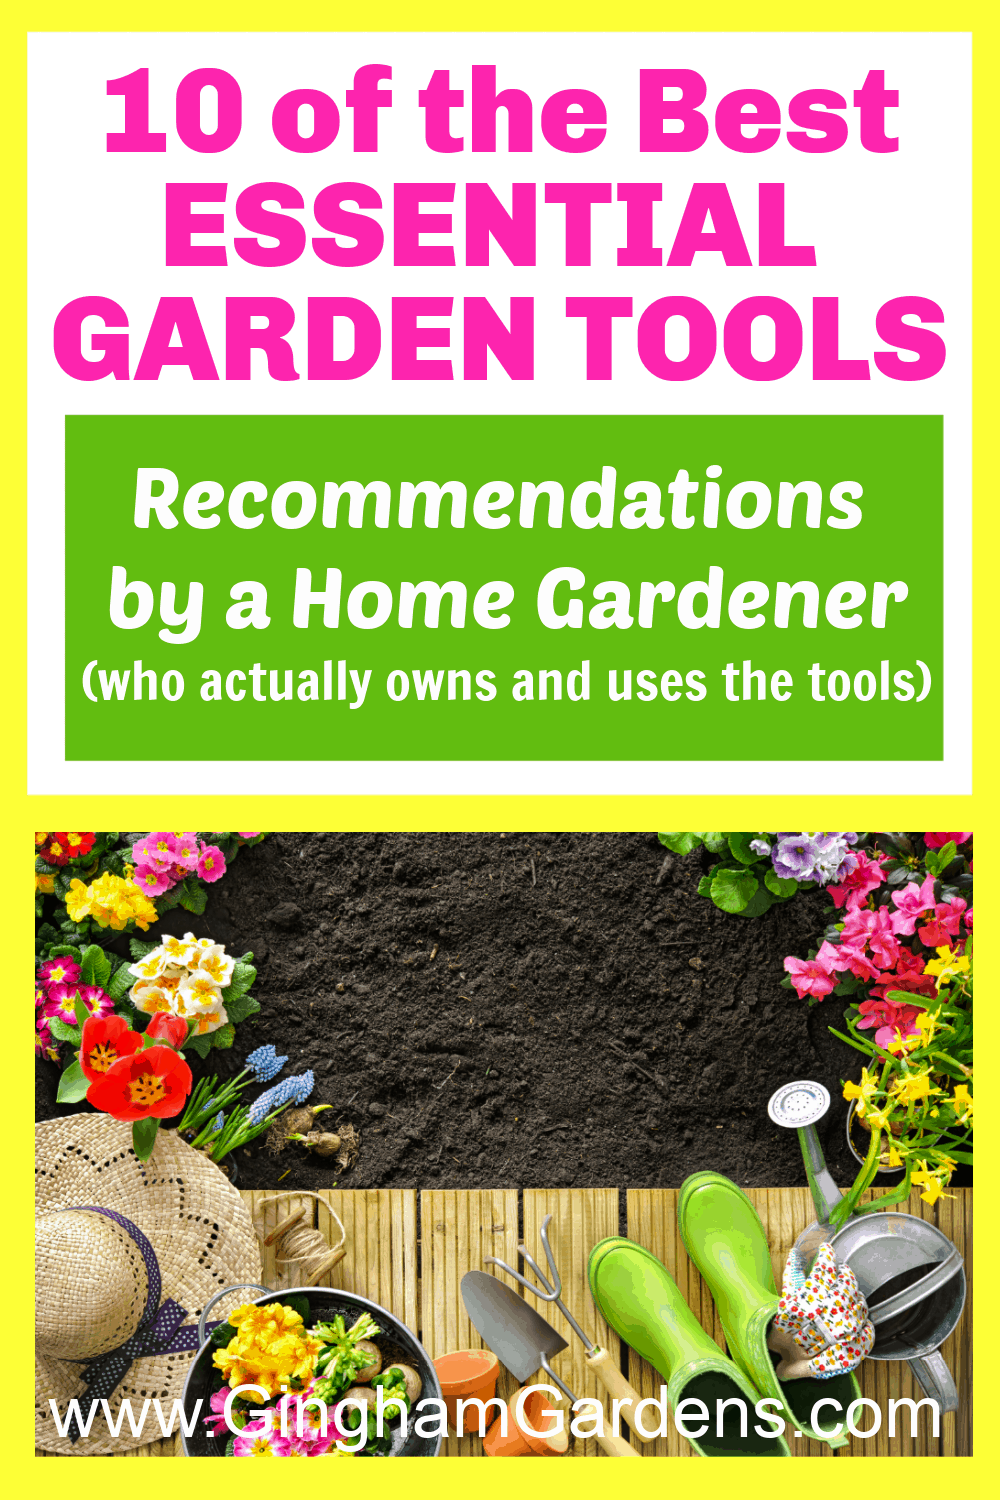 Image of Gardening Tools with Text Overlay - 1- of the Best Essential Gardening Tools